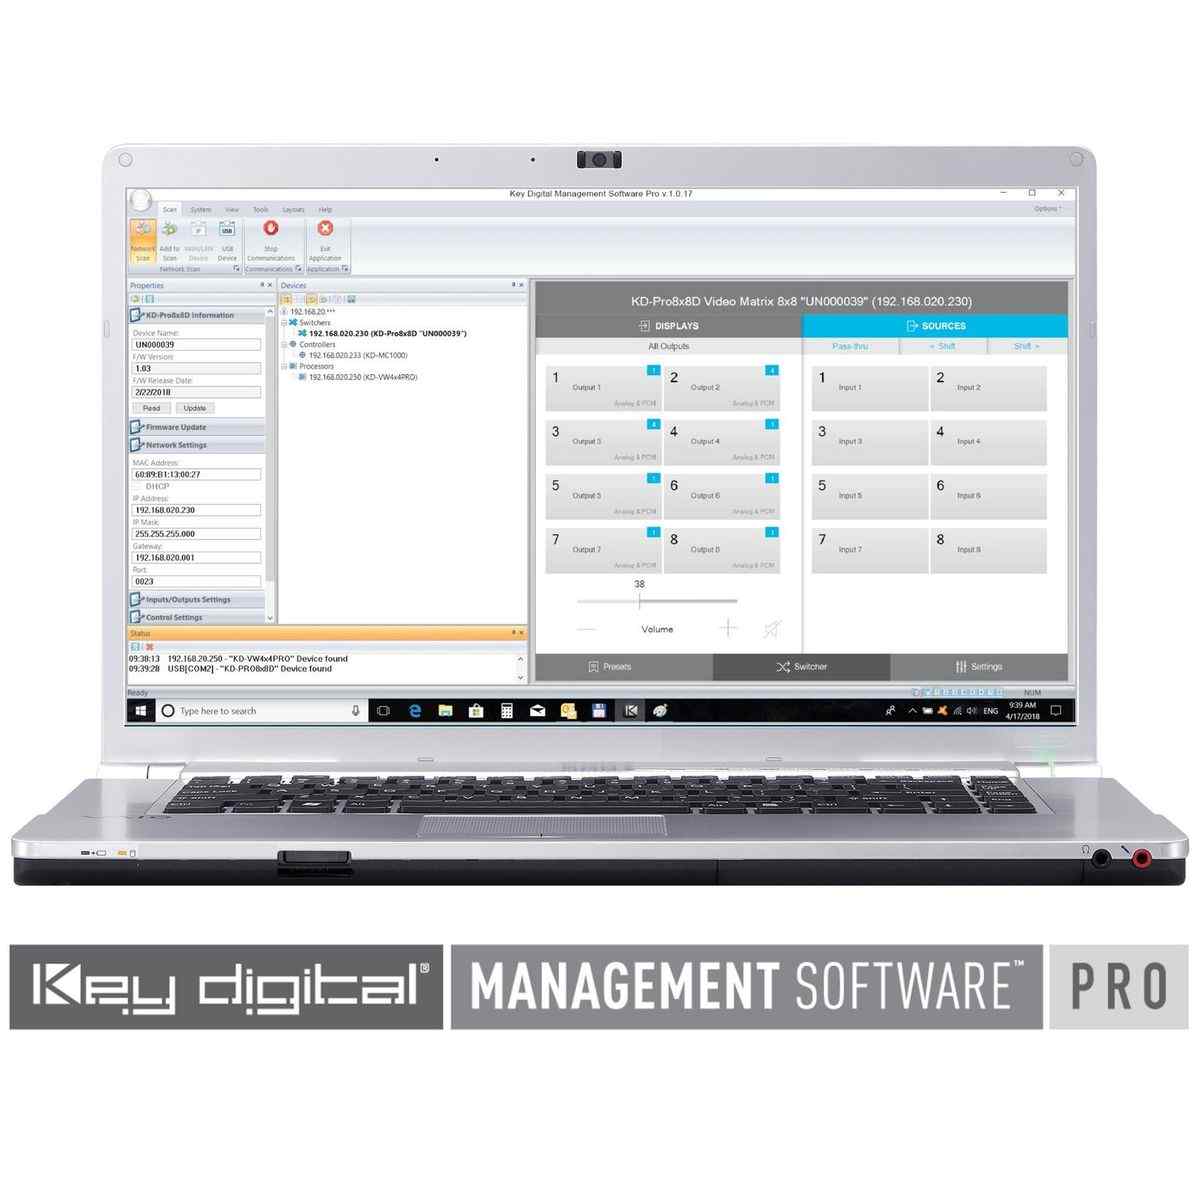 KDMS™ Pro software user interface for Key digital products